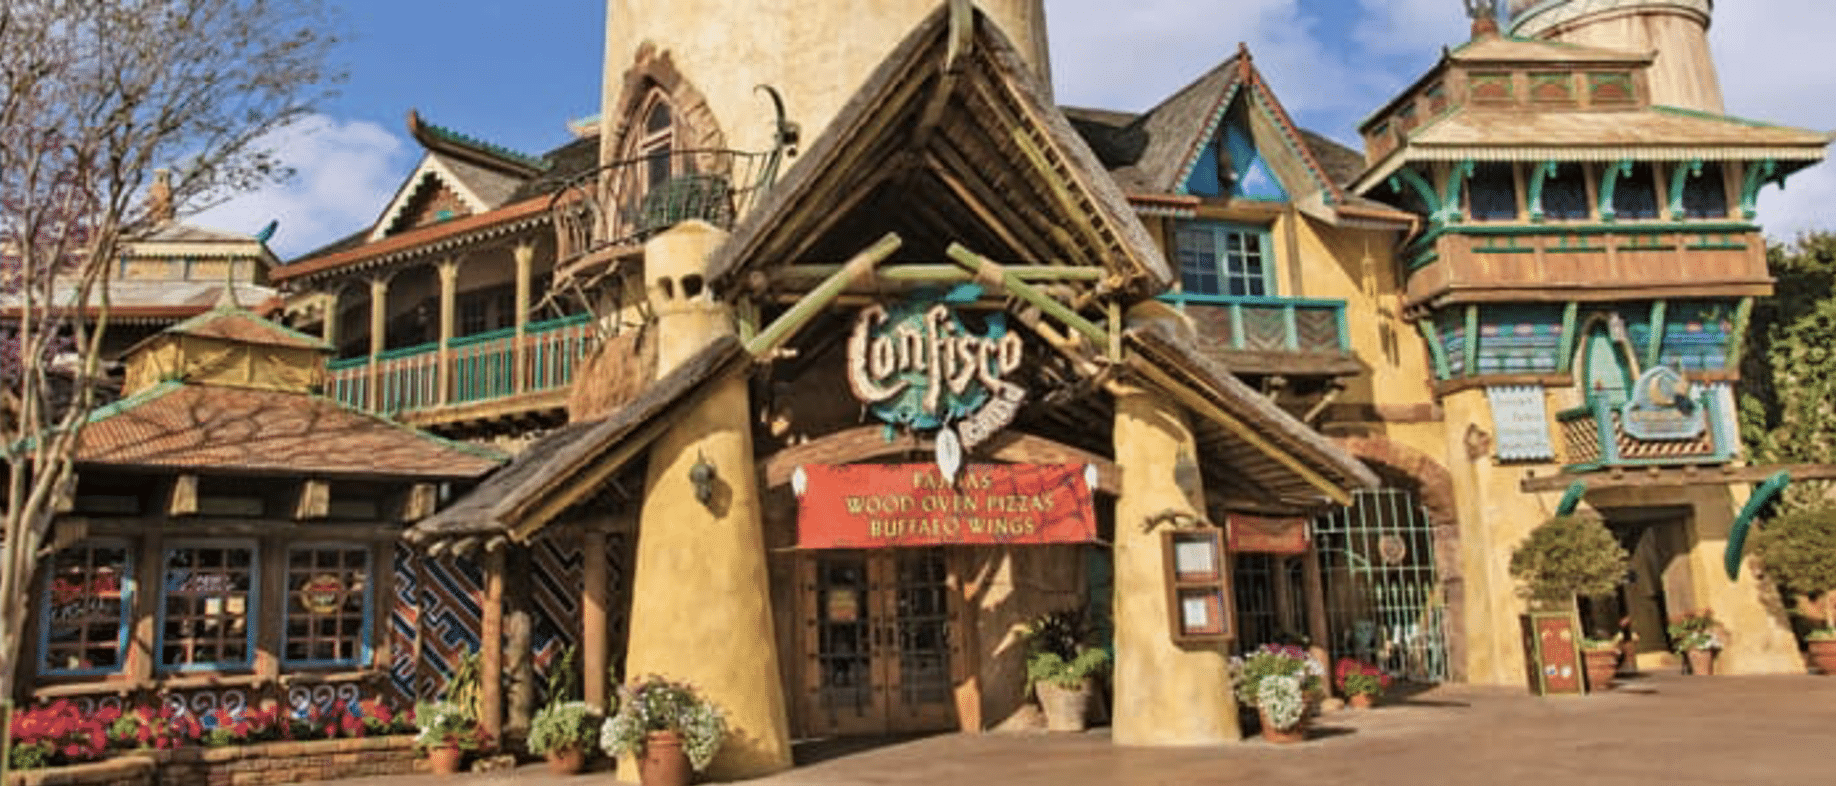 Confisco Grille in Universal Islands of Adventure